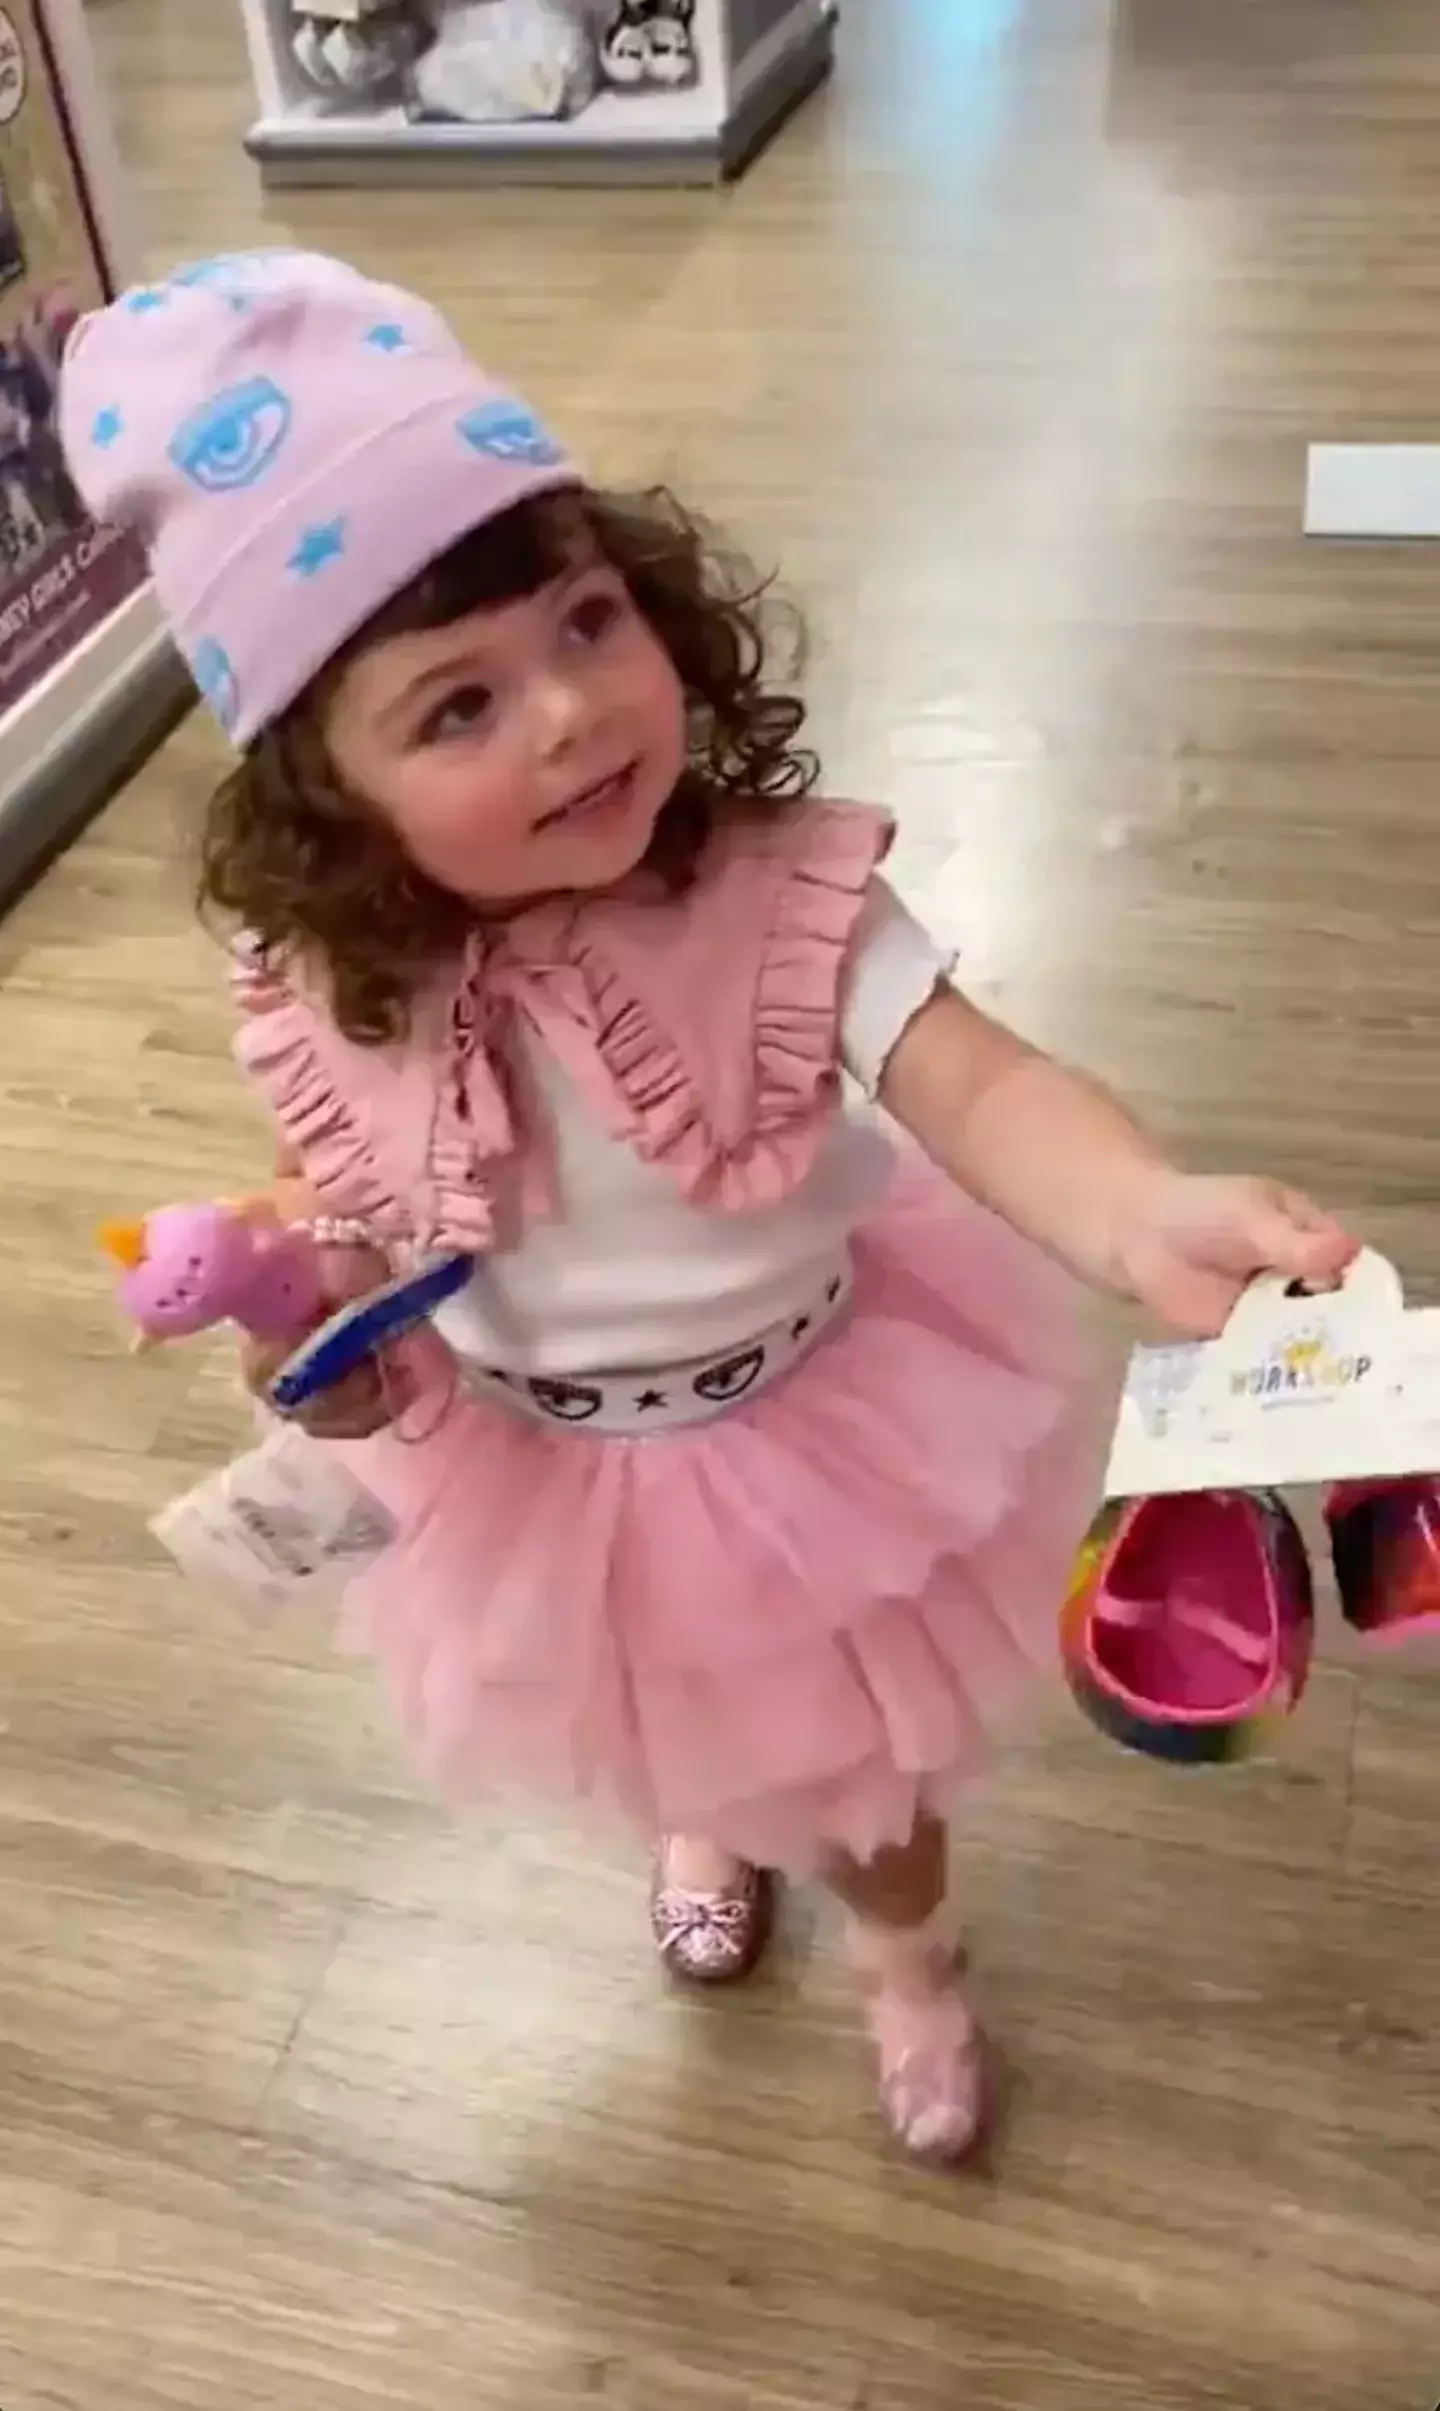 The toddler's only symptoms was an abnormality in her eye. (TikTok/@afashionnerd)